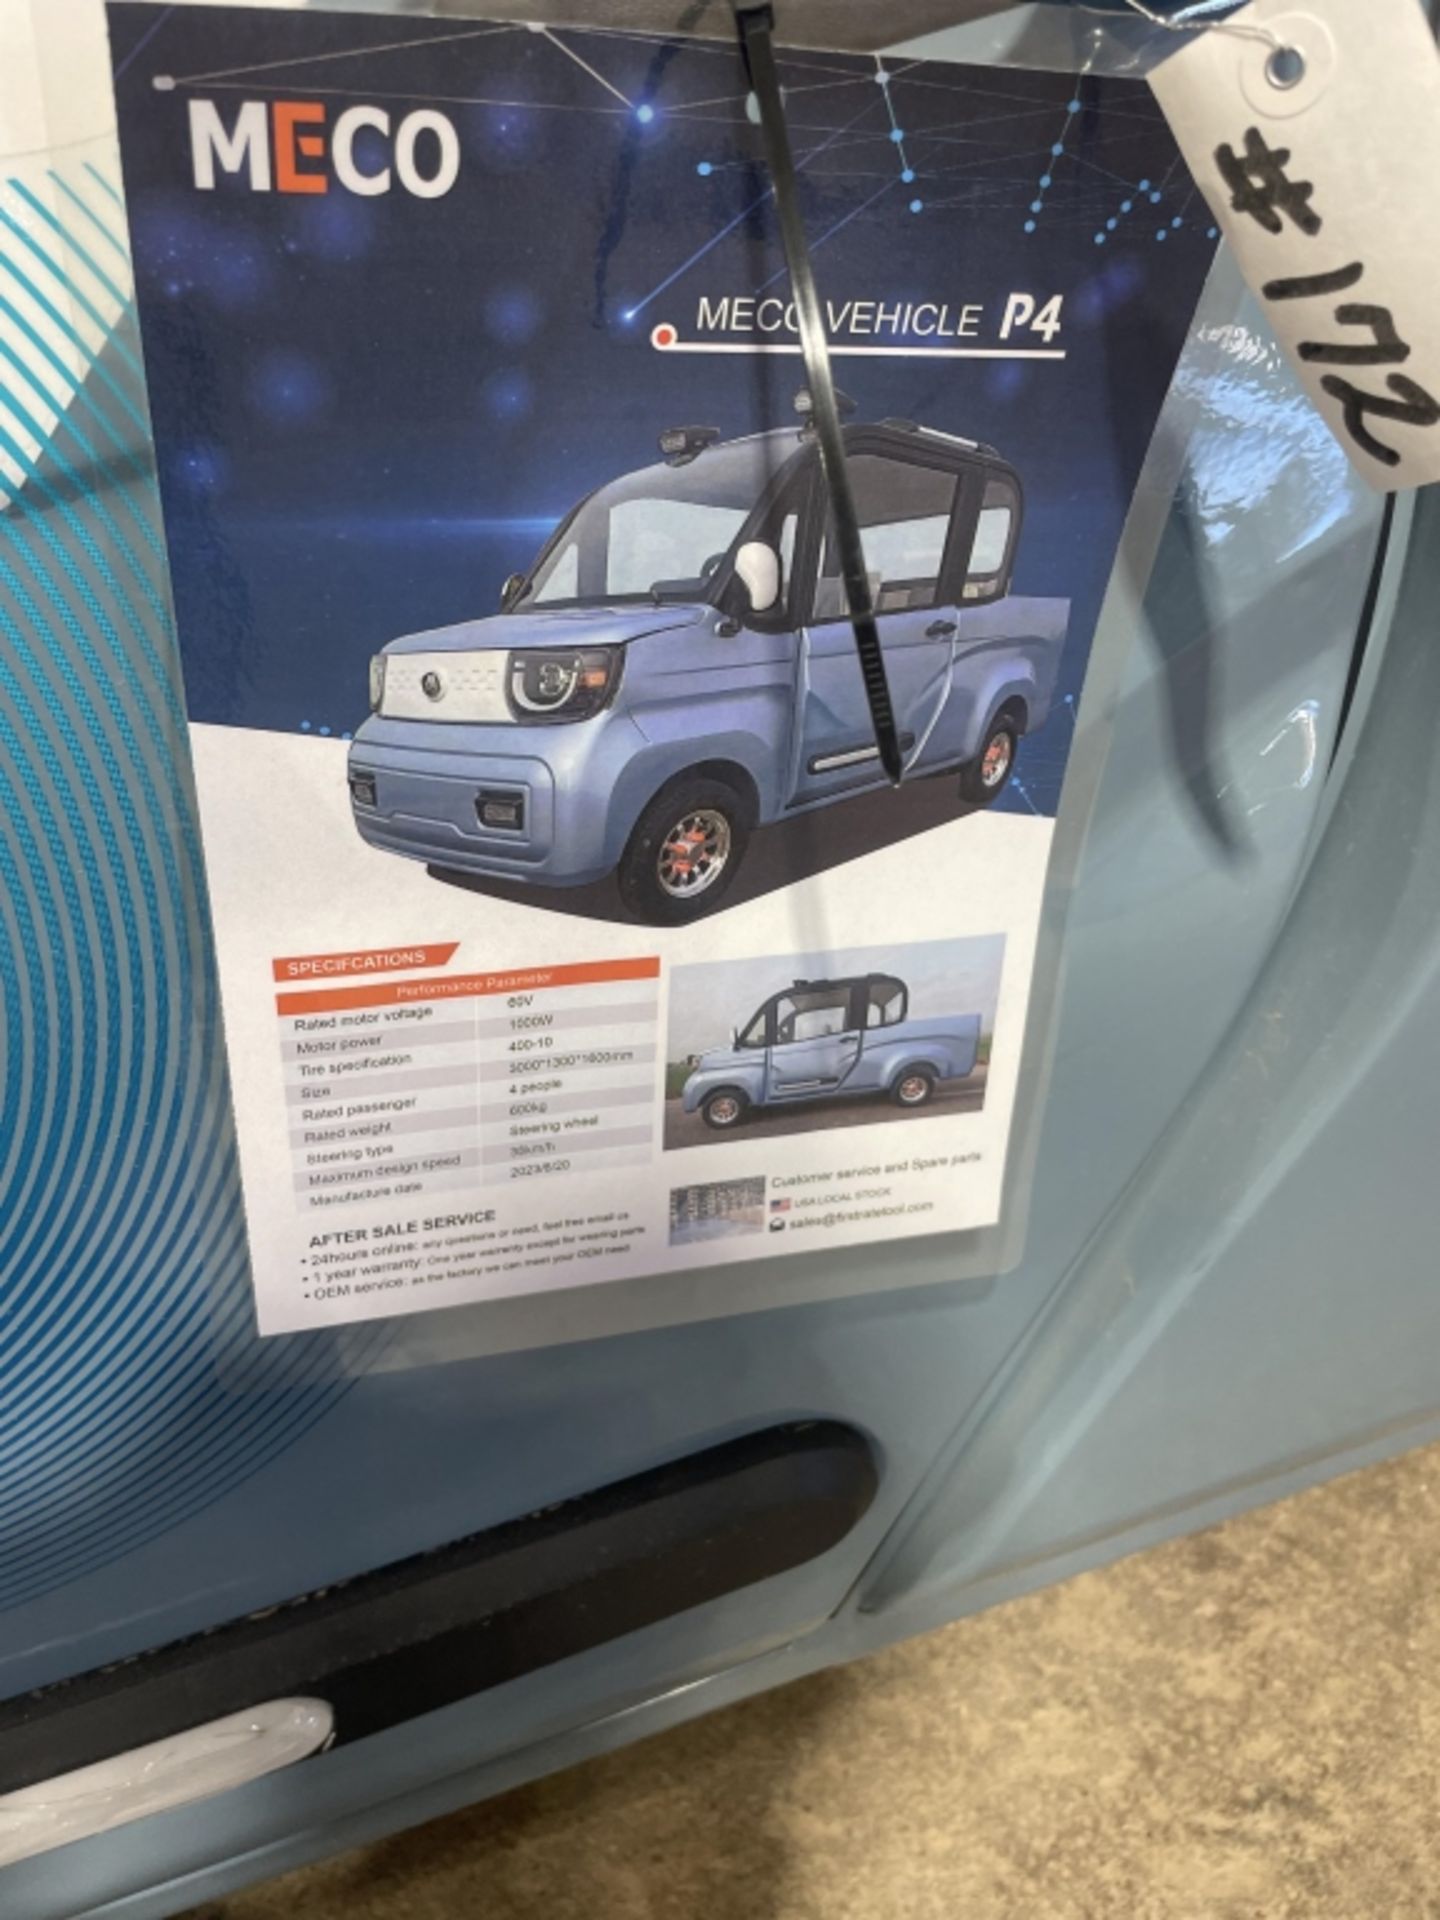 MECO P4 Electric Vehicle - Image 10 of 15